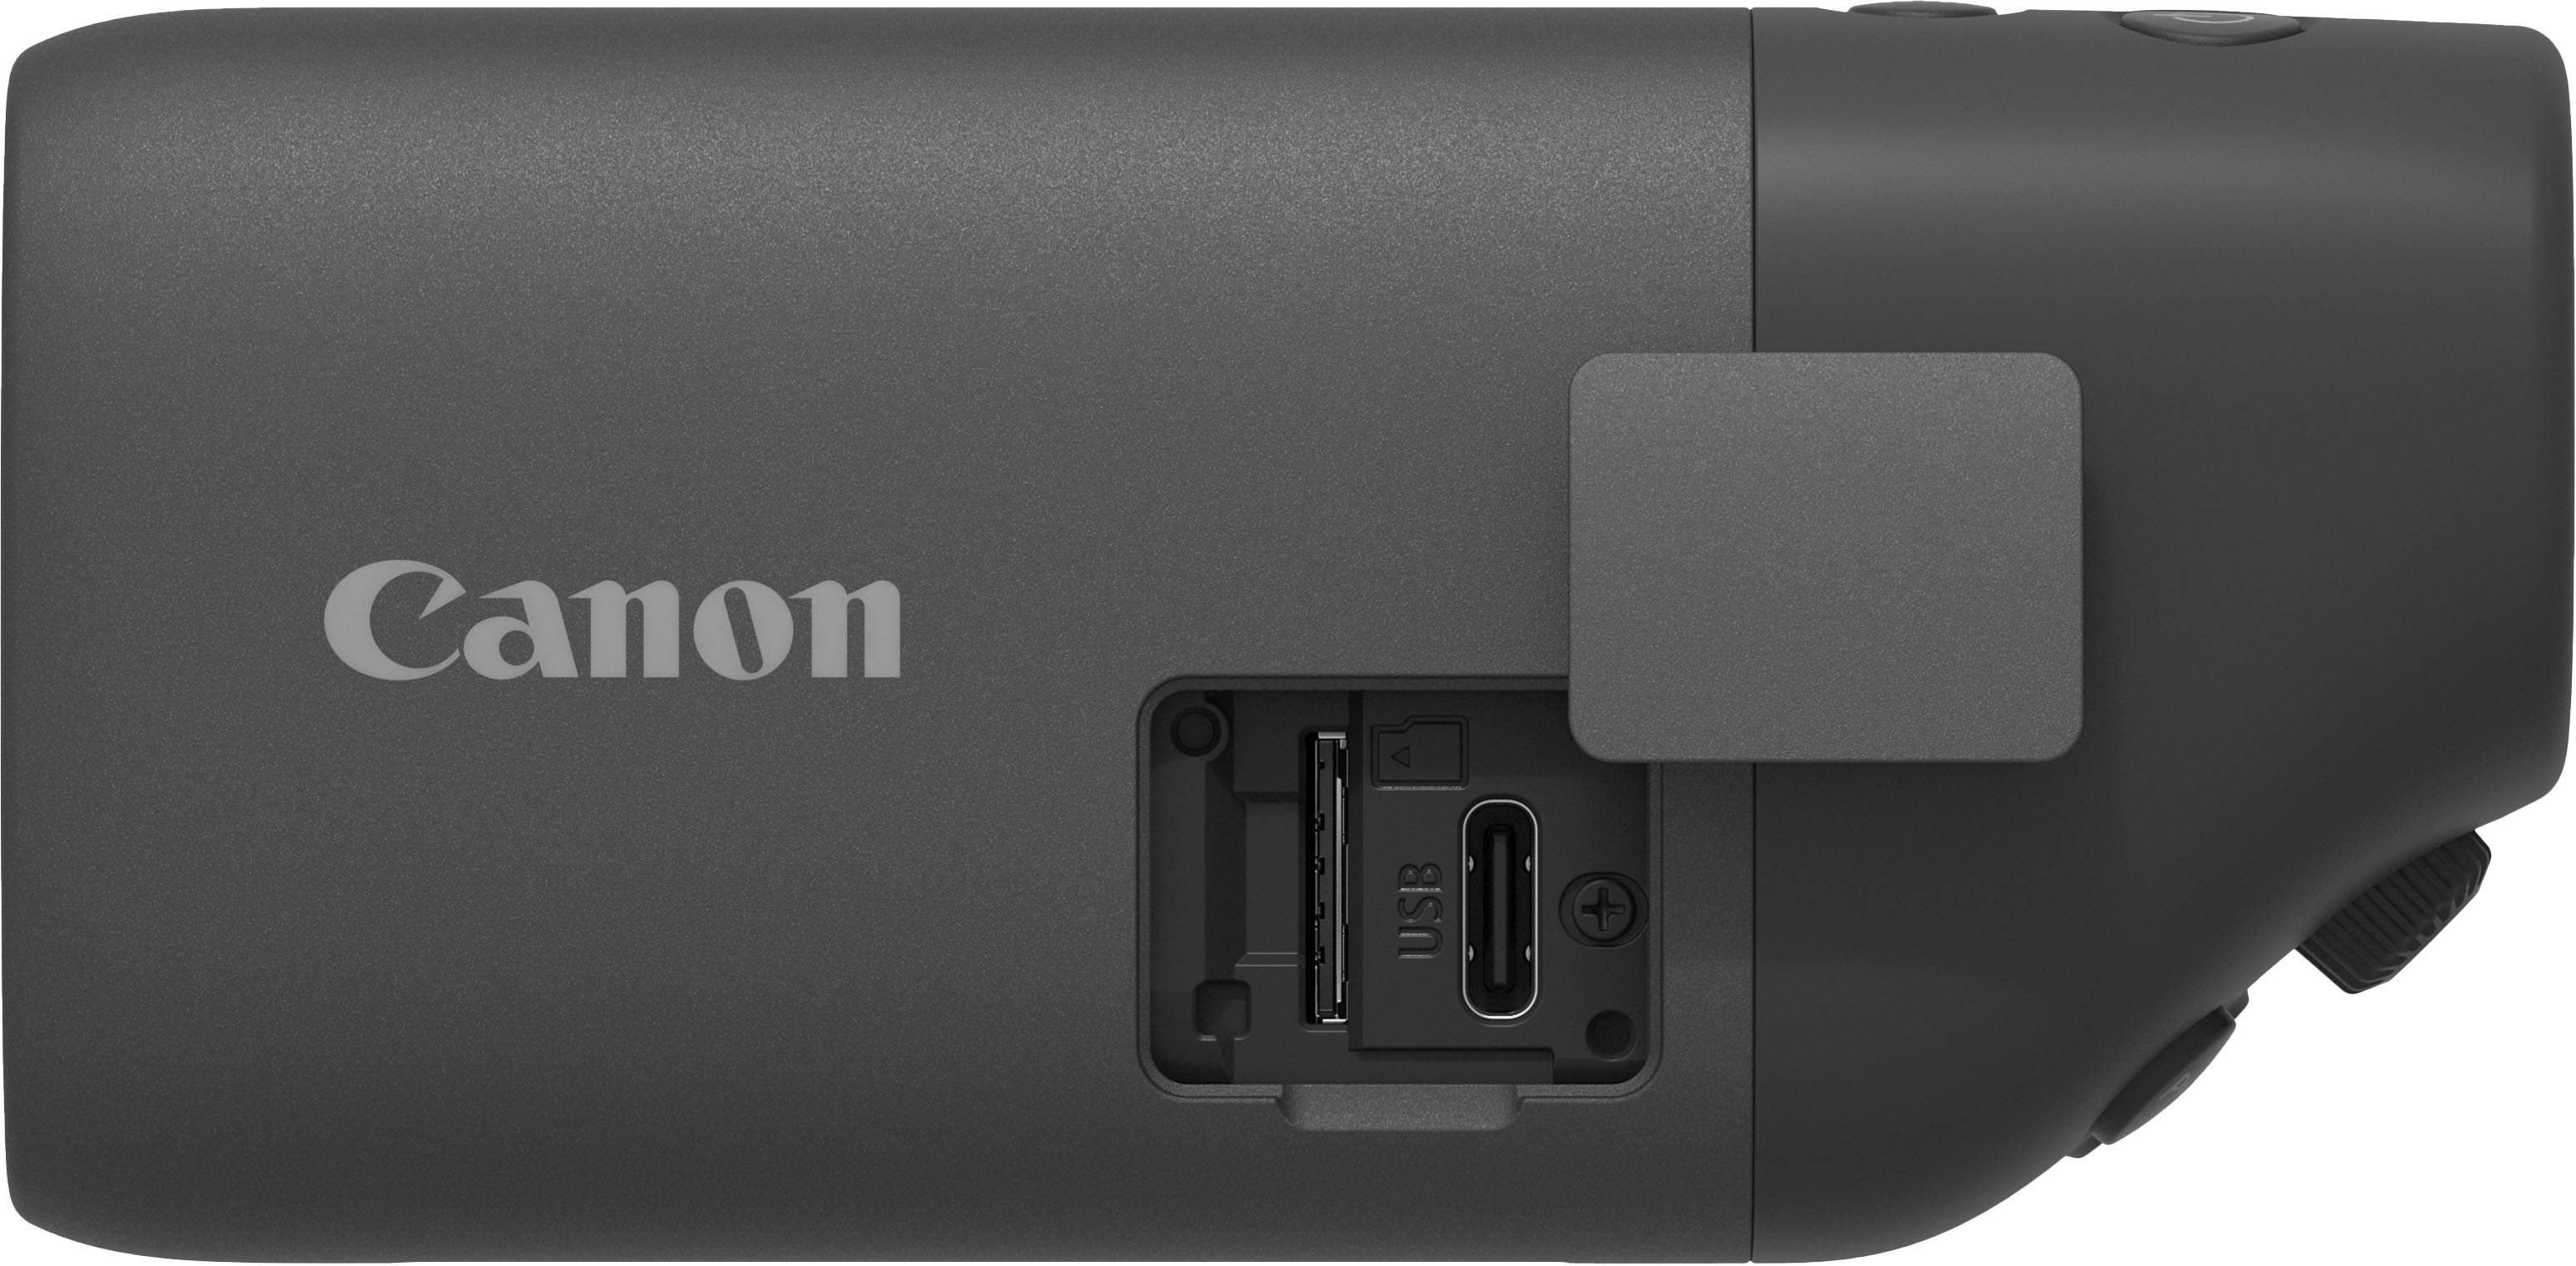 Angle View: Canon - 251 Ink Cartridge - Gray